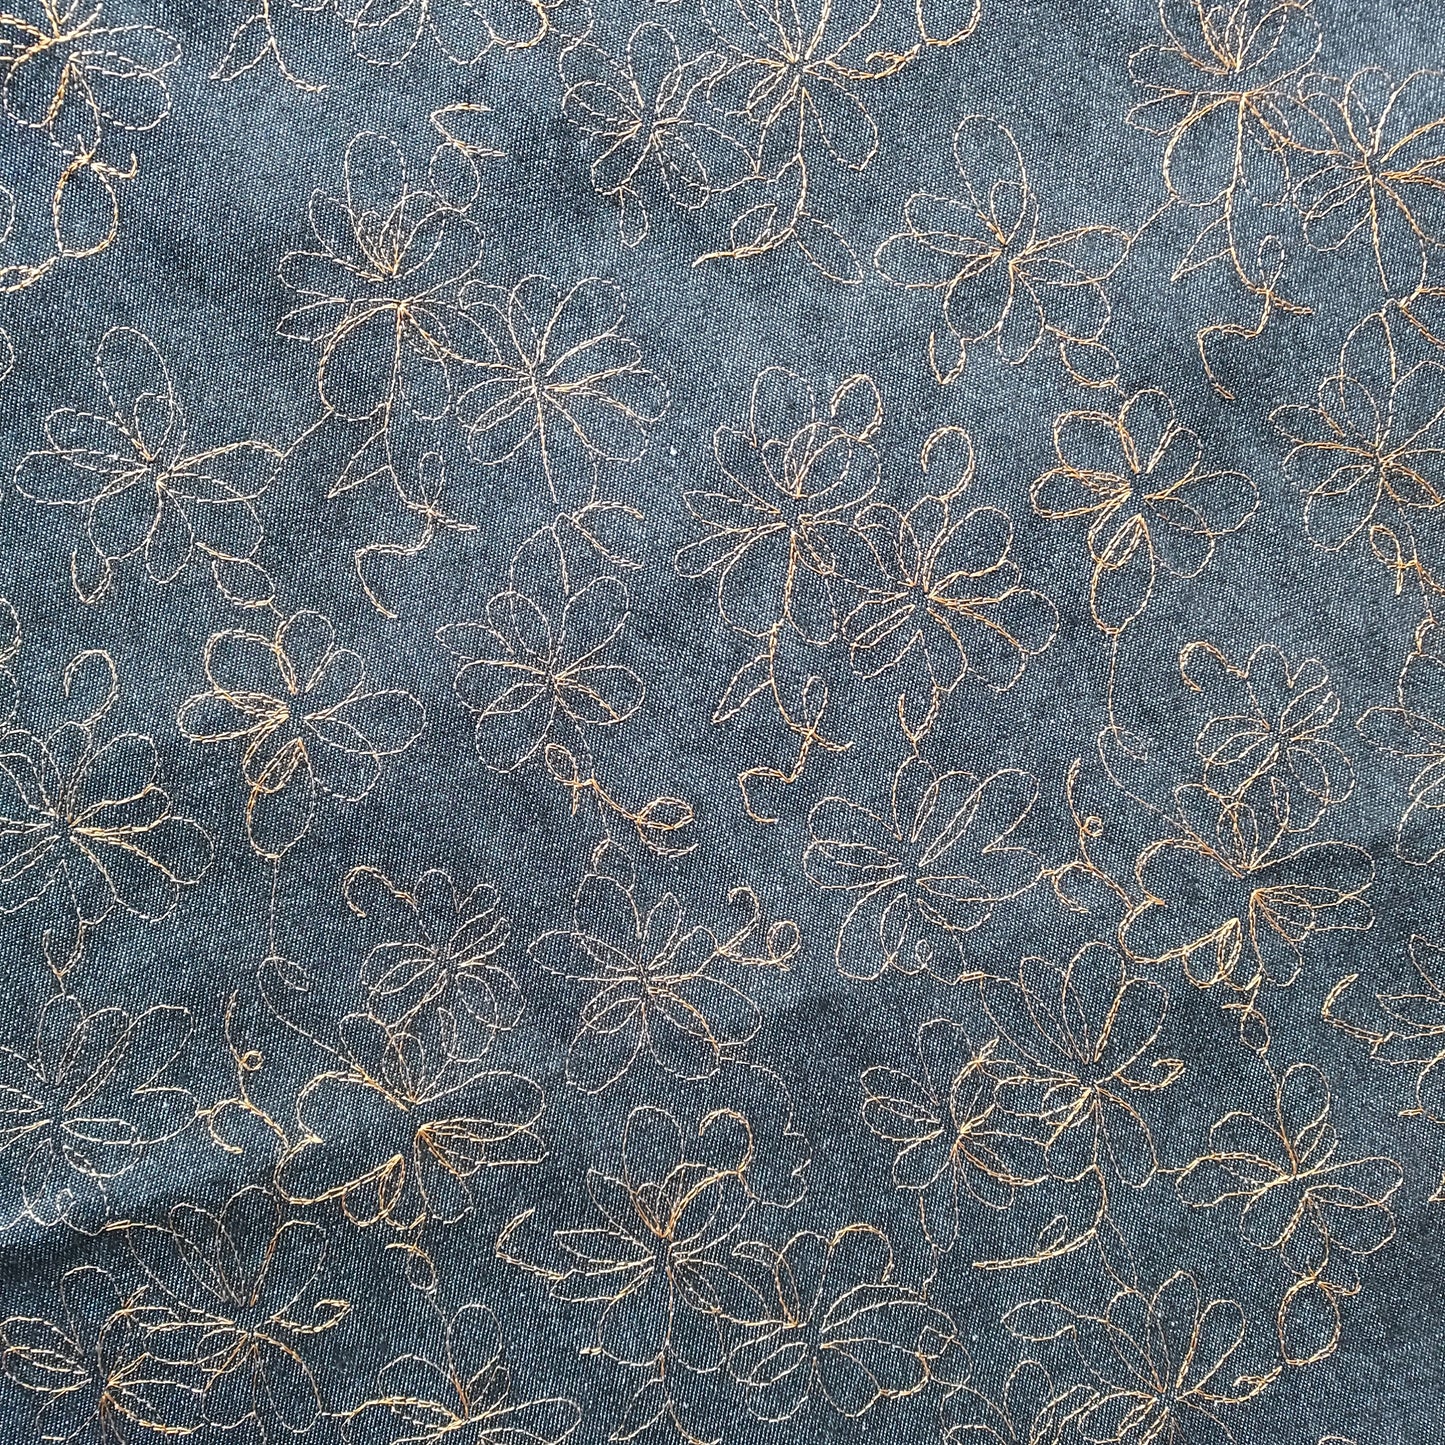 Embroidered Floral Denim 7.5oz Fabric